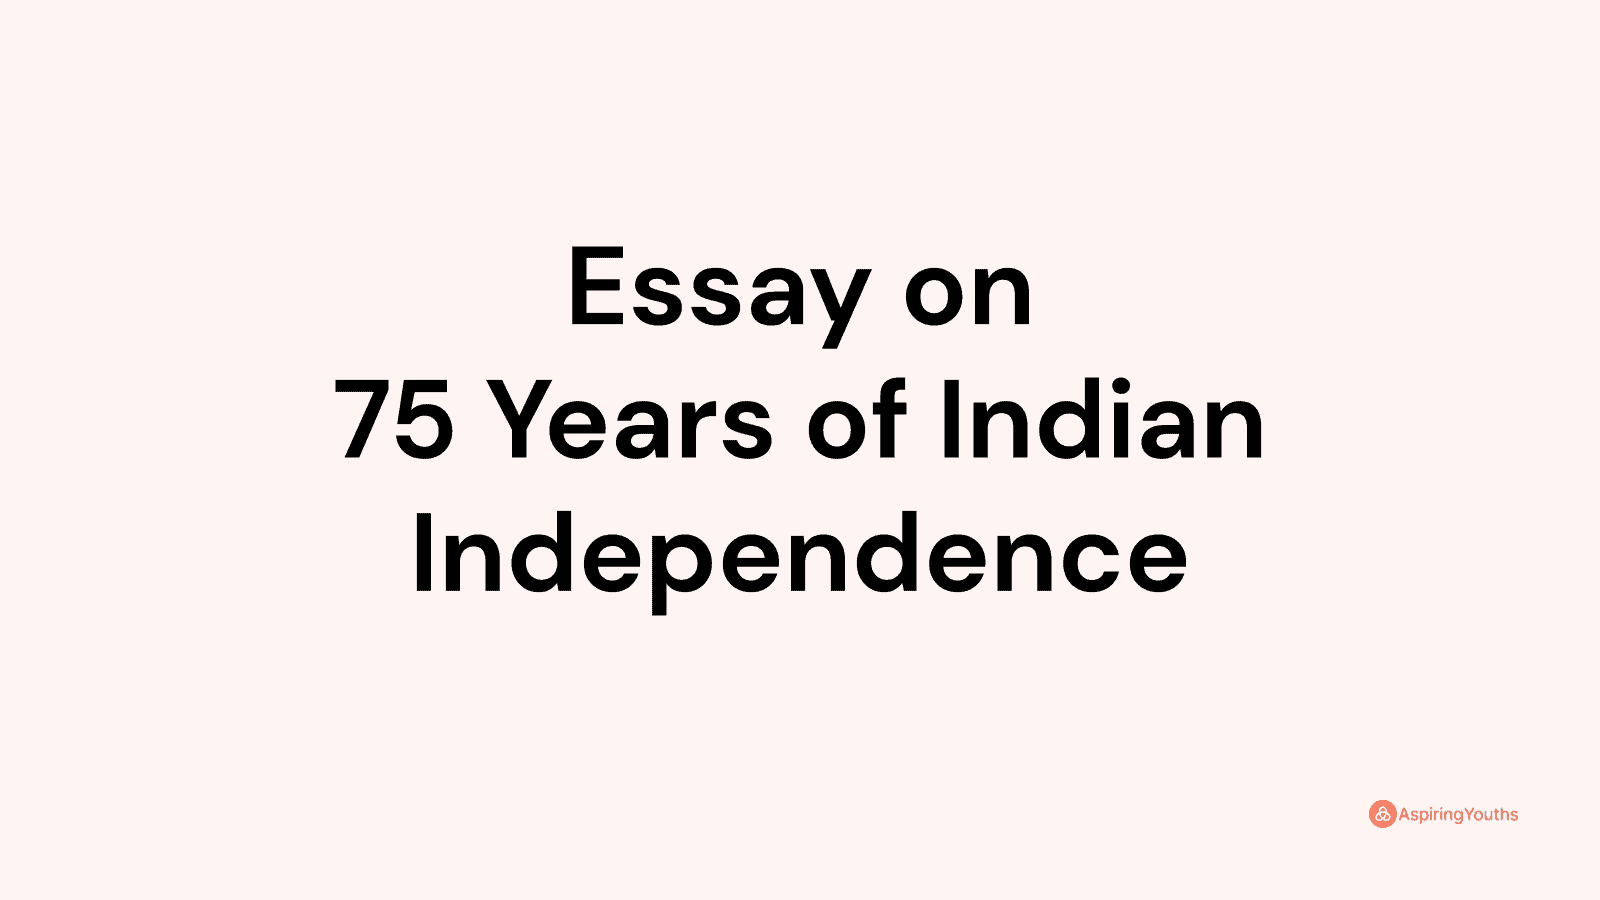 india's achievements in 75 years of independence essay